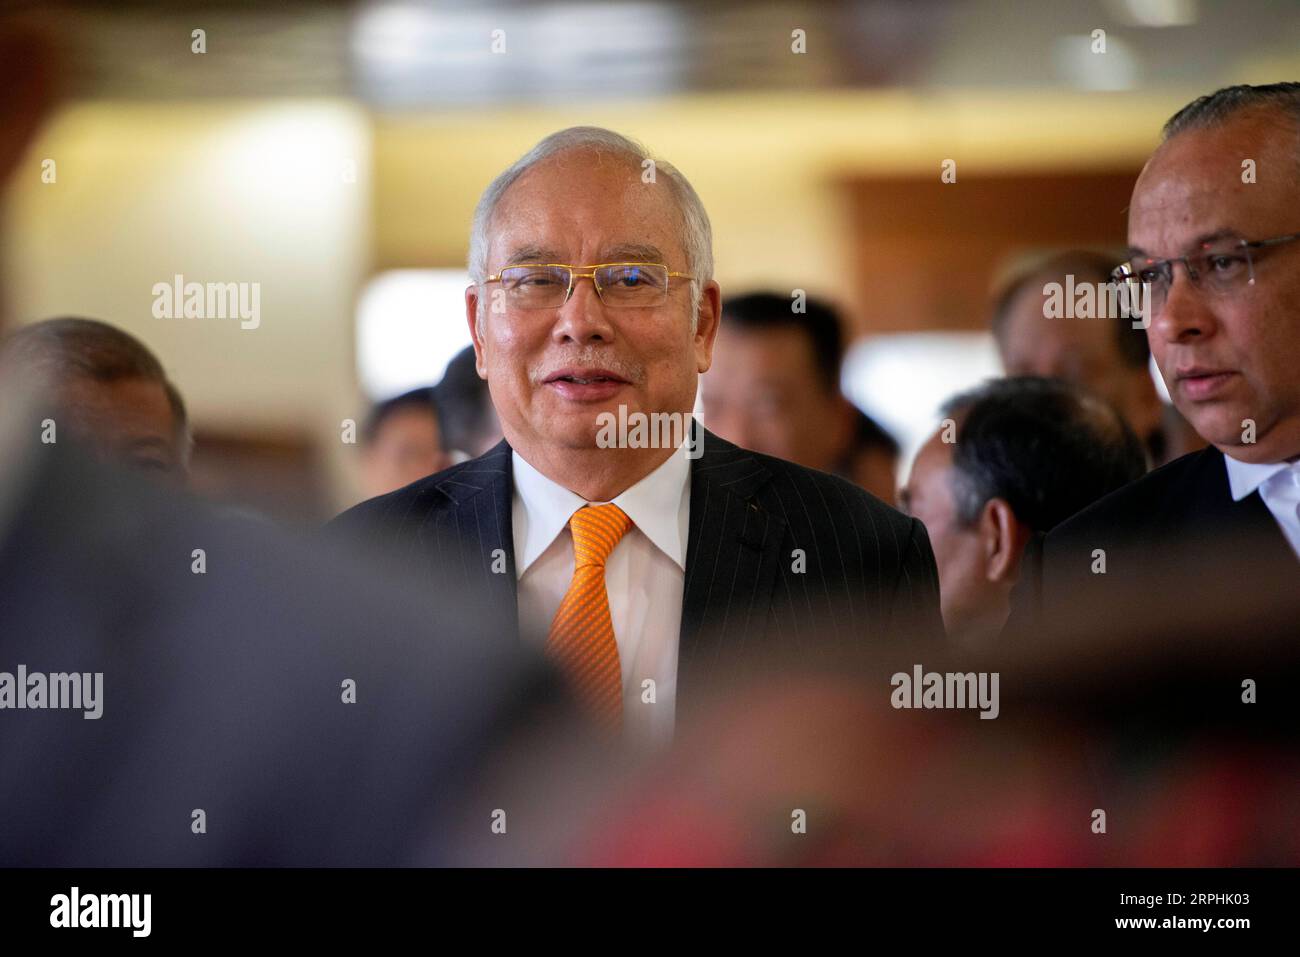 News Bilder des Tages 191111 -- KUALA LUMPUR, Nov. 11, 2019 Xinhua -- Former Malaysian Prime Minister Najib Razak C arrives at the court in Kuala Lumpur, Malaysia, Nov. 11, 2019. Former Malaysian Prime Minister Najib Razak was ordered to enter defense on Monday for the corruption charges related to the state investment fund 1Malaysia Development Berhad 1MDB. Photo by Chong Voon Chung/Xinhua MALAYSIA-KUALA LUMPUR-NAJIB-CASE PUBLICATIONxNOTxINxCHN Stock Photo